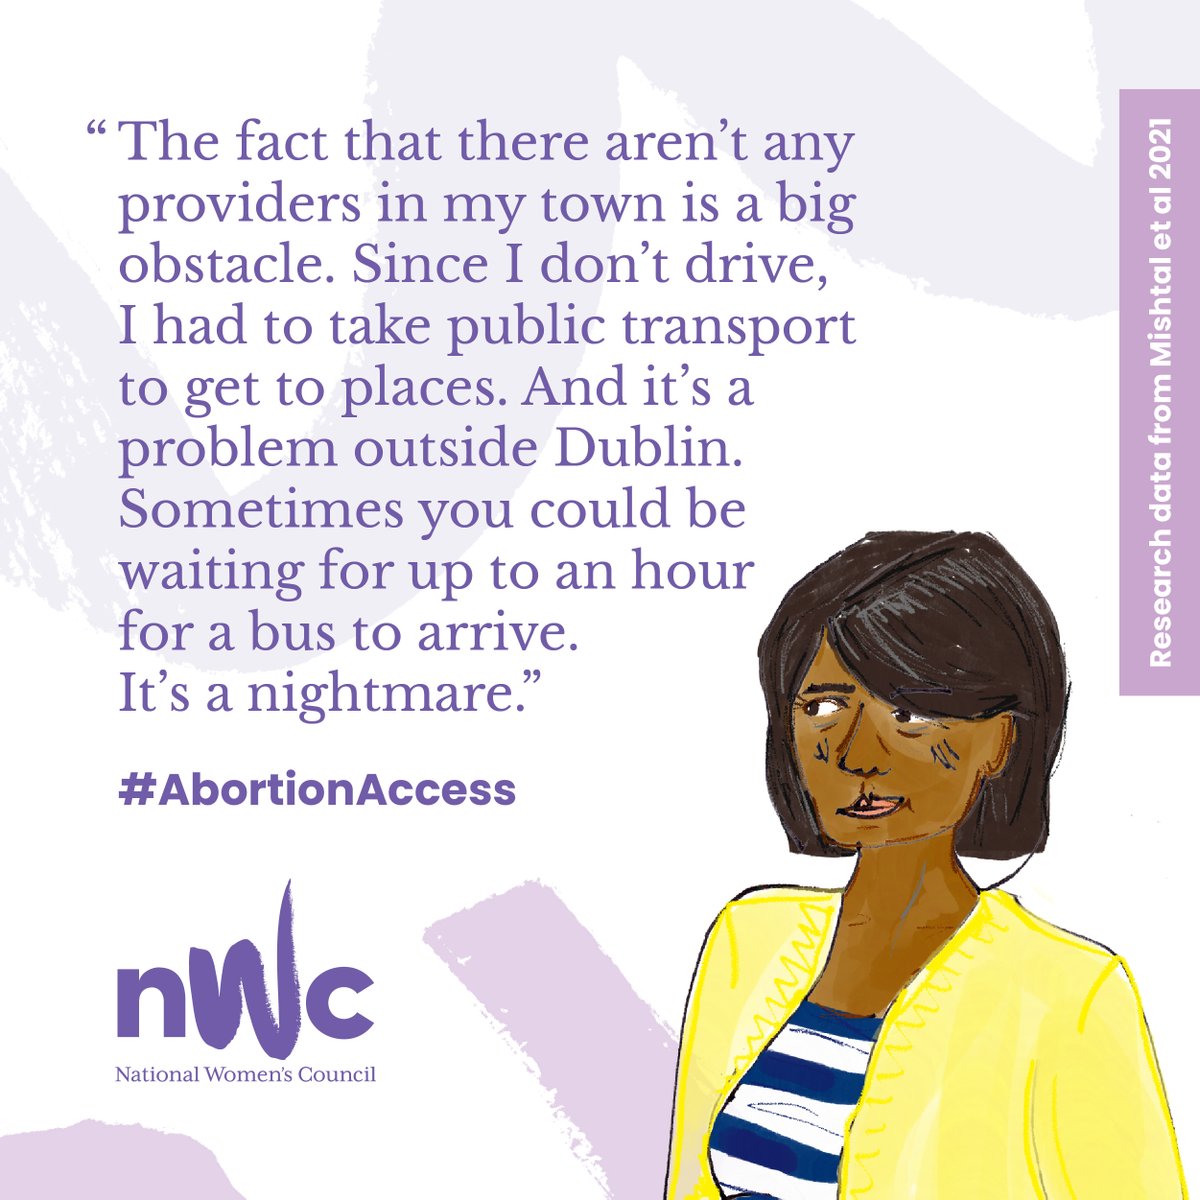 5 years on, 8 of our 19 maternity hospitals are STILL not providing abortion care in line with the law. Tell your TD this needs to change so all women can access the care they need, close to home. Take action now, it takes just 2 mins: nwci.ie/take-action